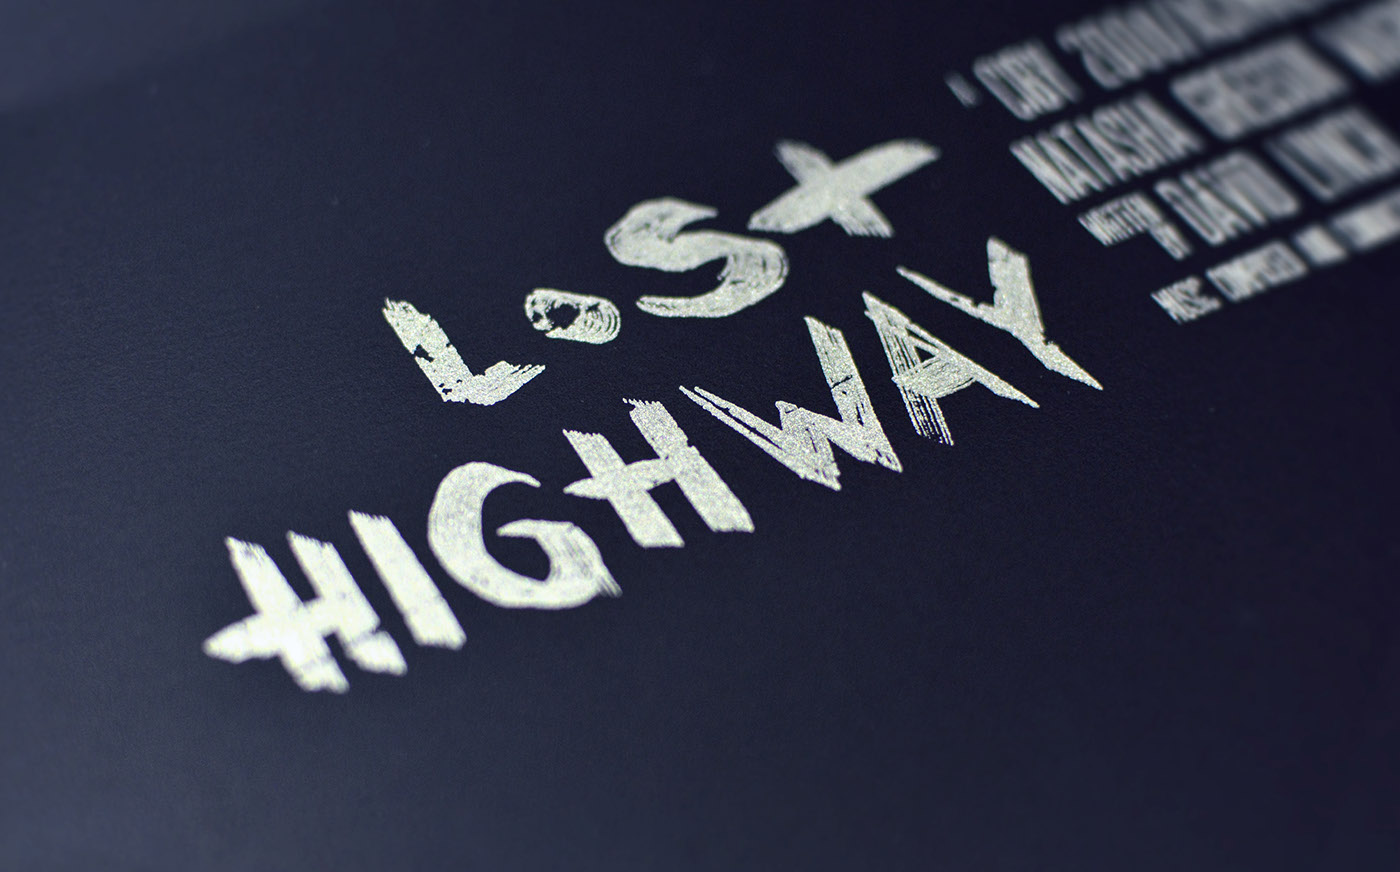 twin peaks lost highway David Lynch movie poster film poster